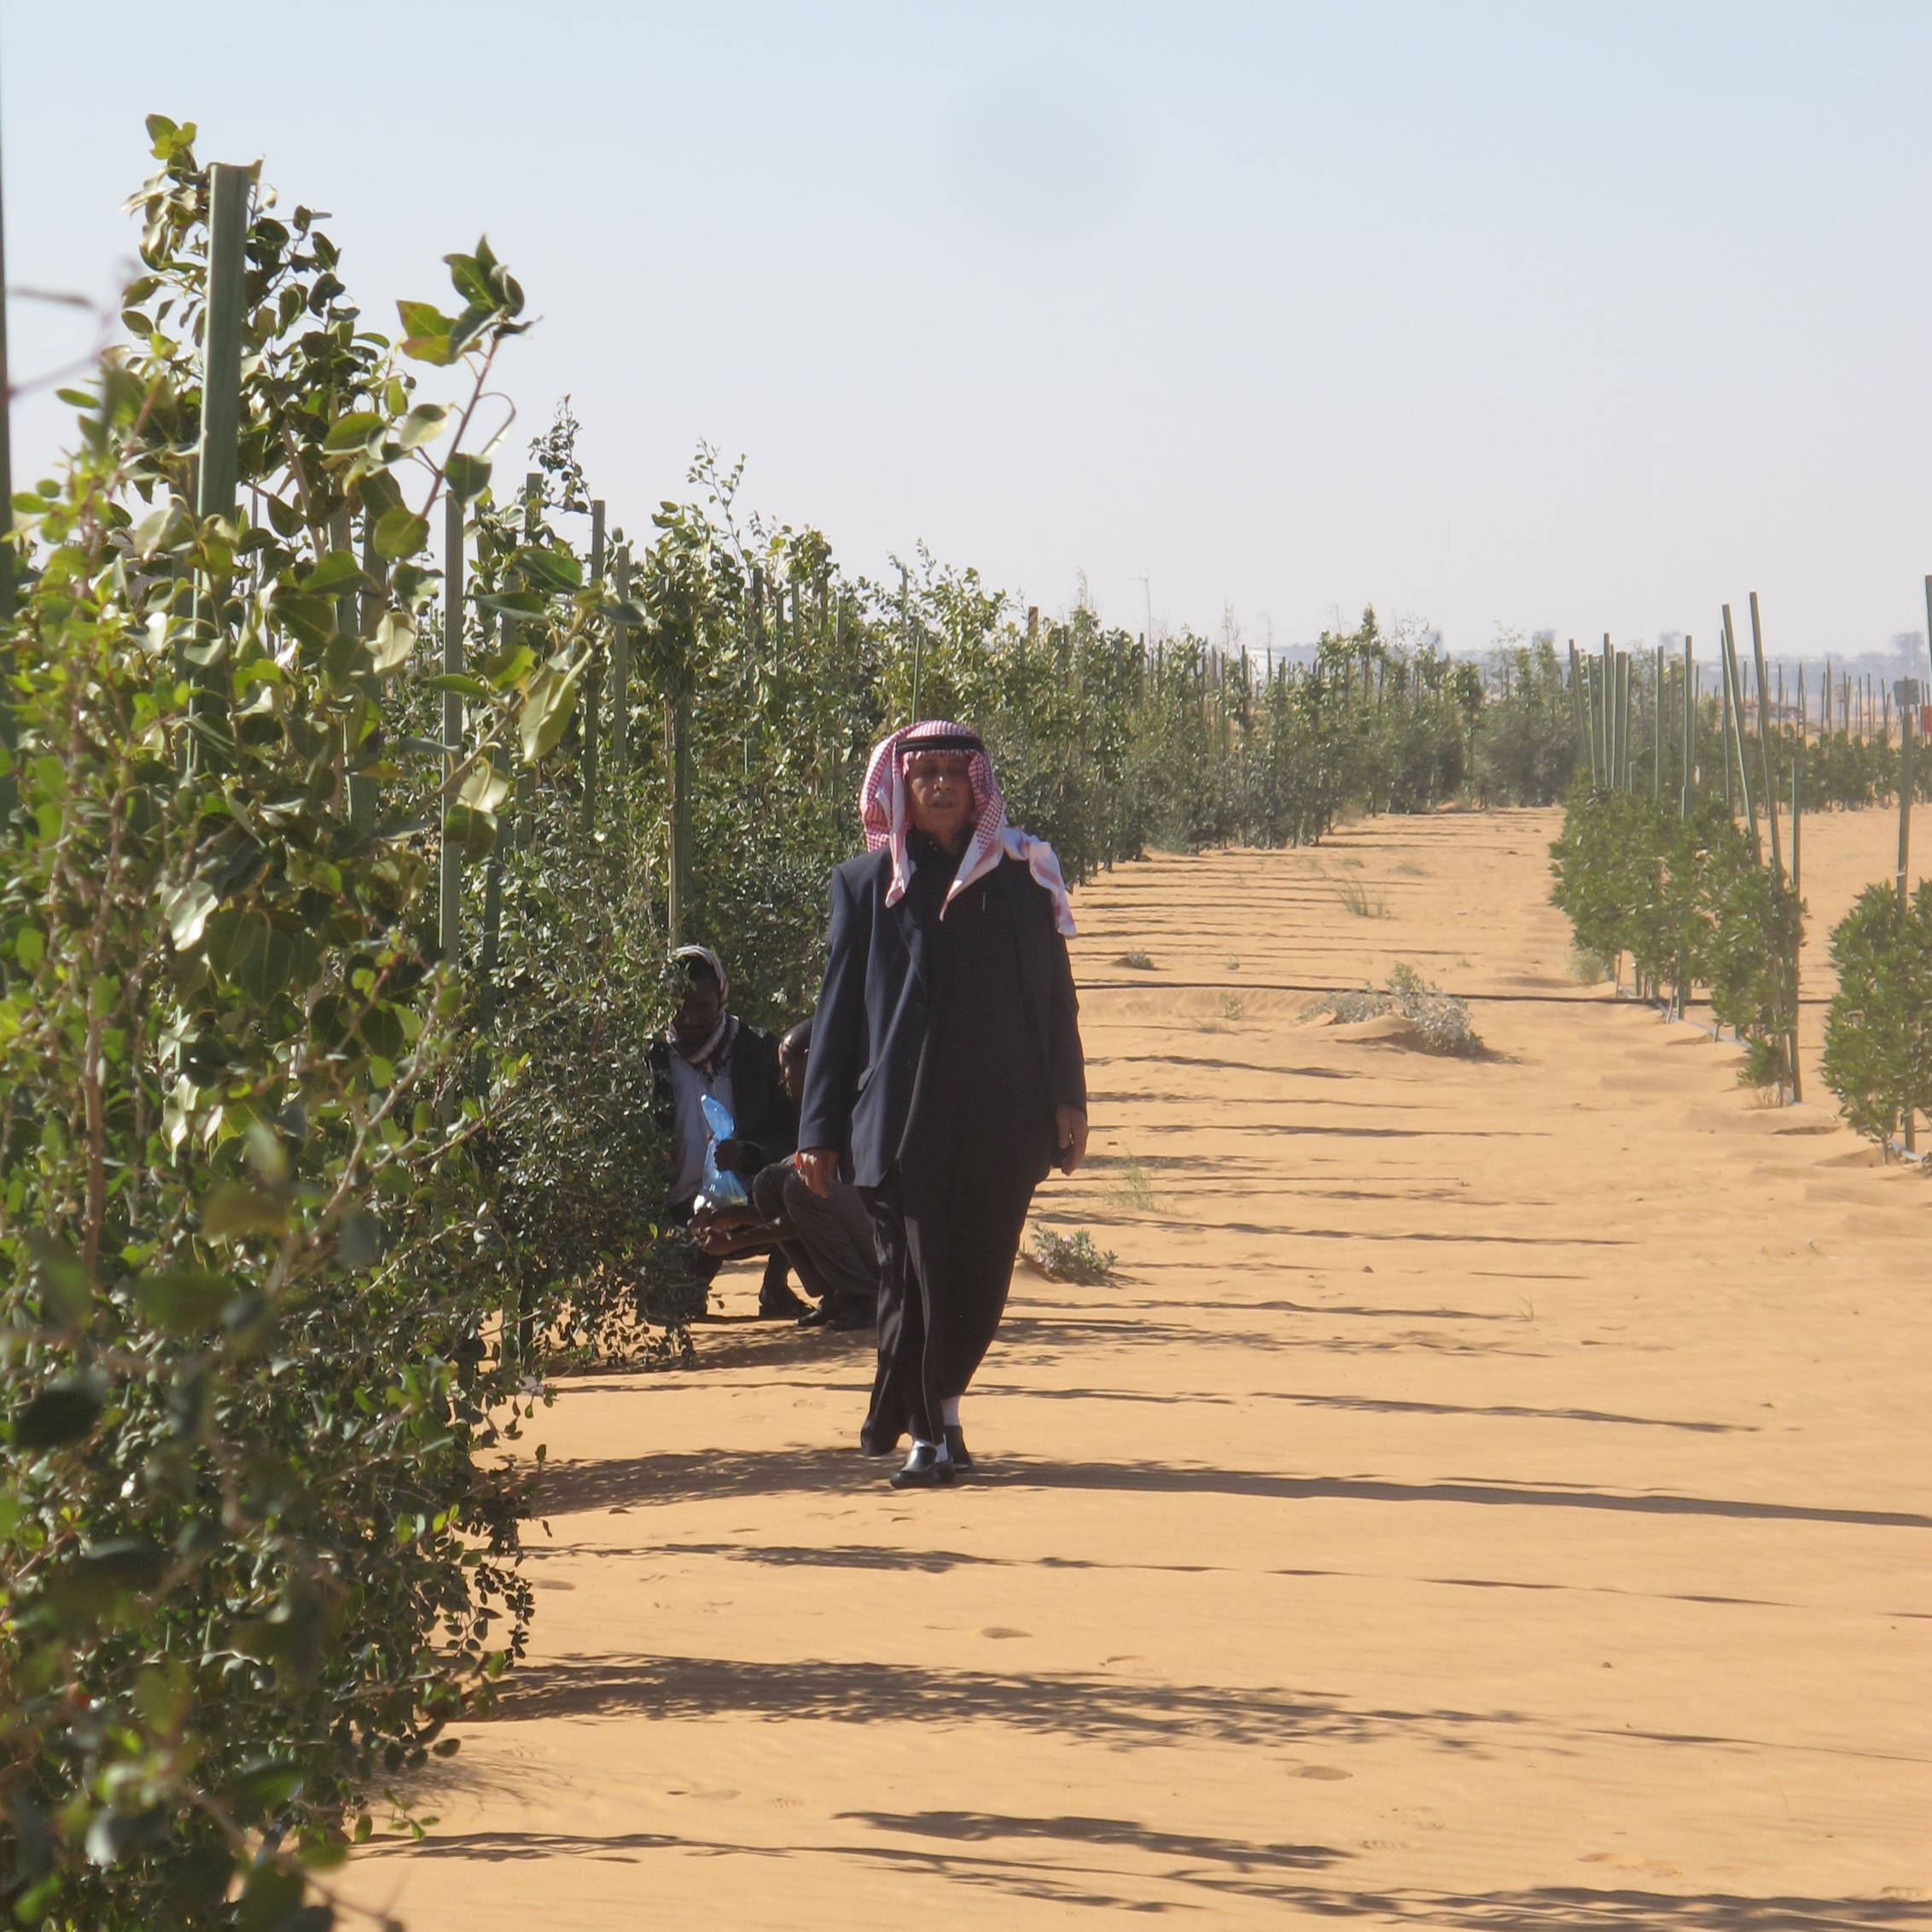 Ibrahim in the Khurais desert project with 4600 fruit trees.